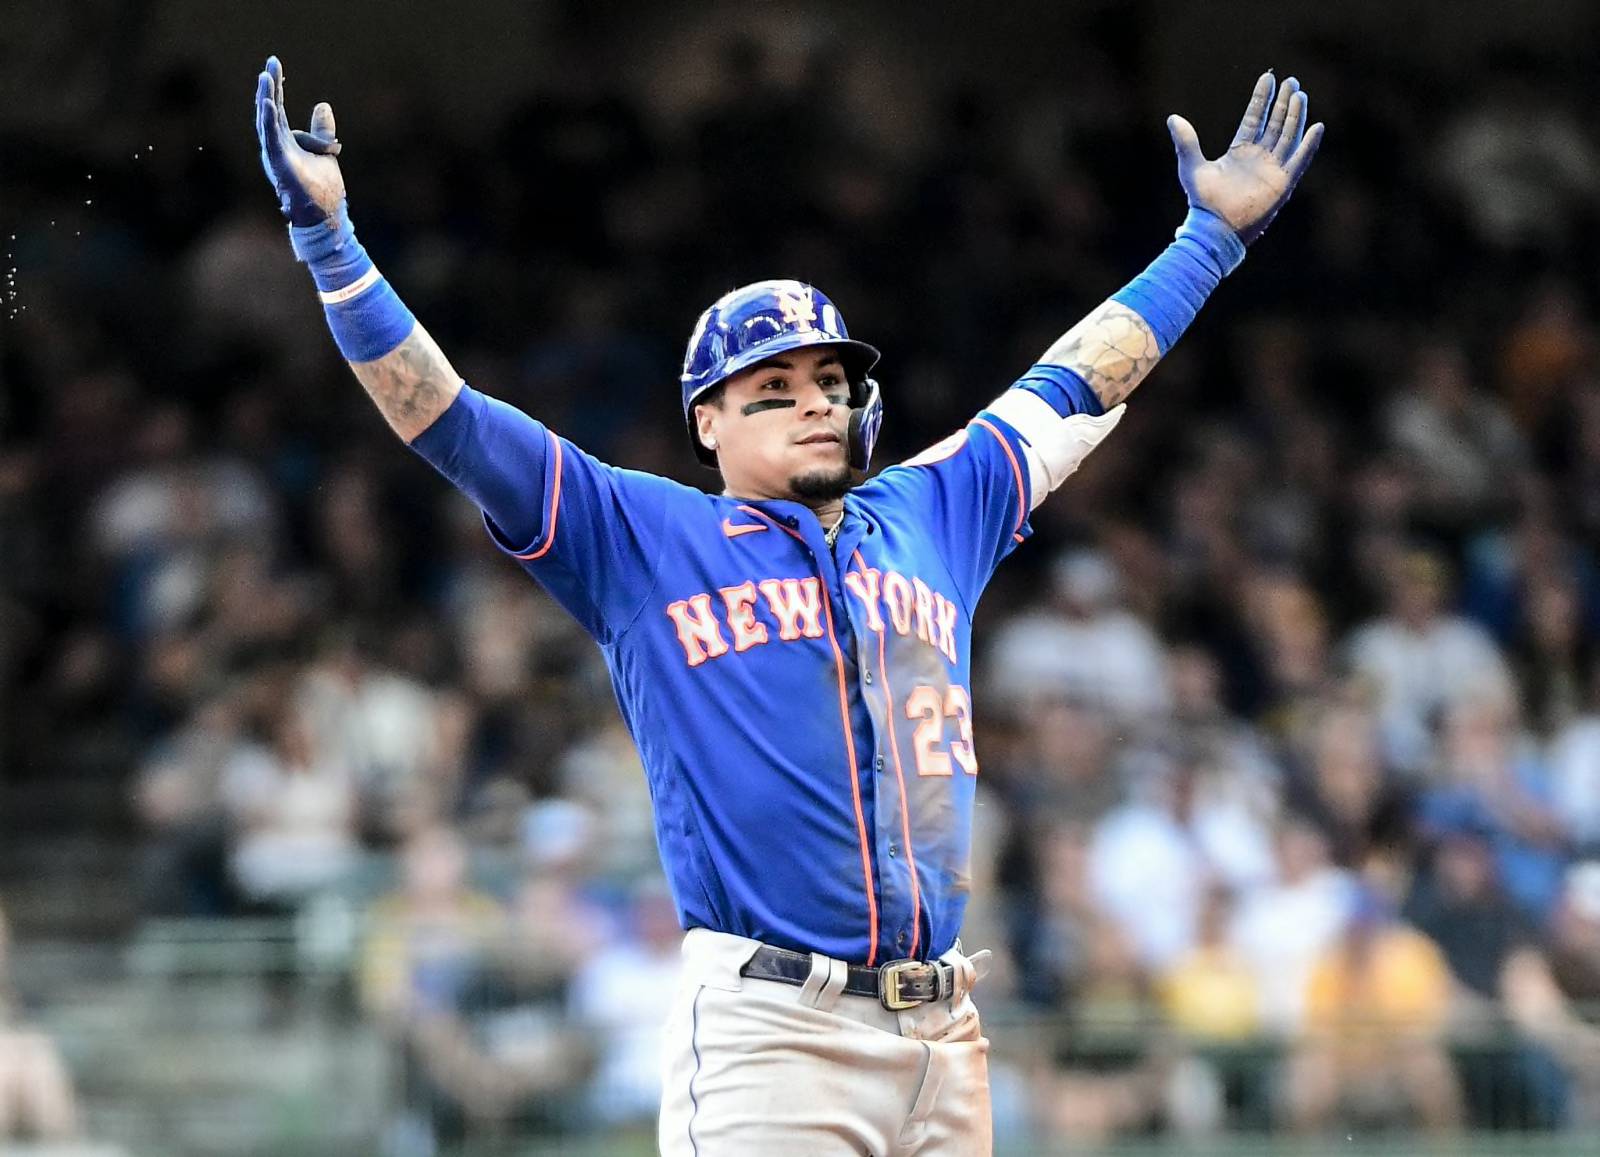 Baez, Lindor apologize to Mets fans for thumbs-down celebration